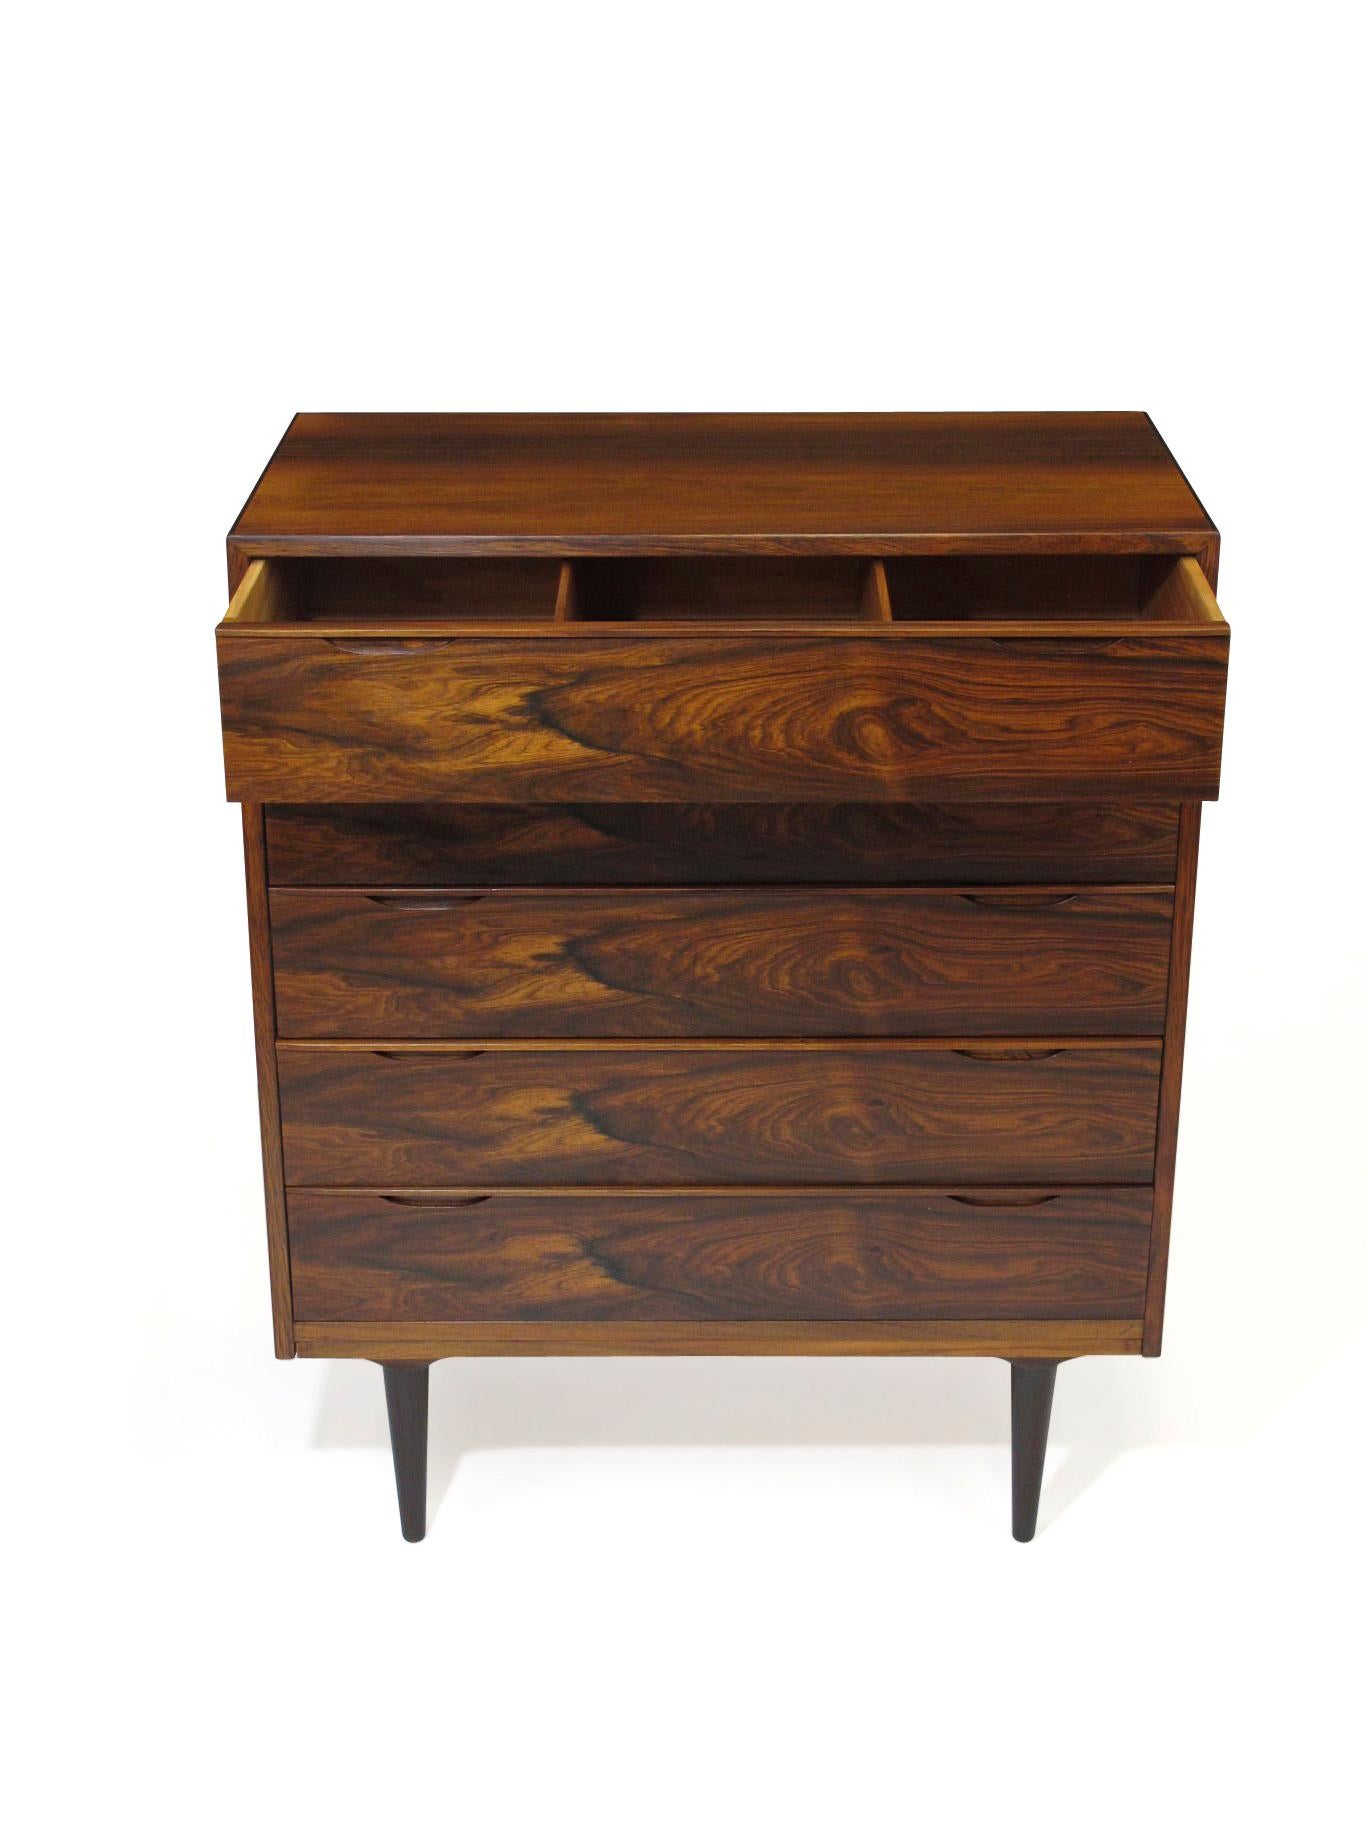 Oiled Vintage Danish Brazilian Rosewood Chest of Drawers